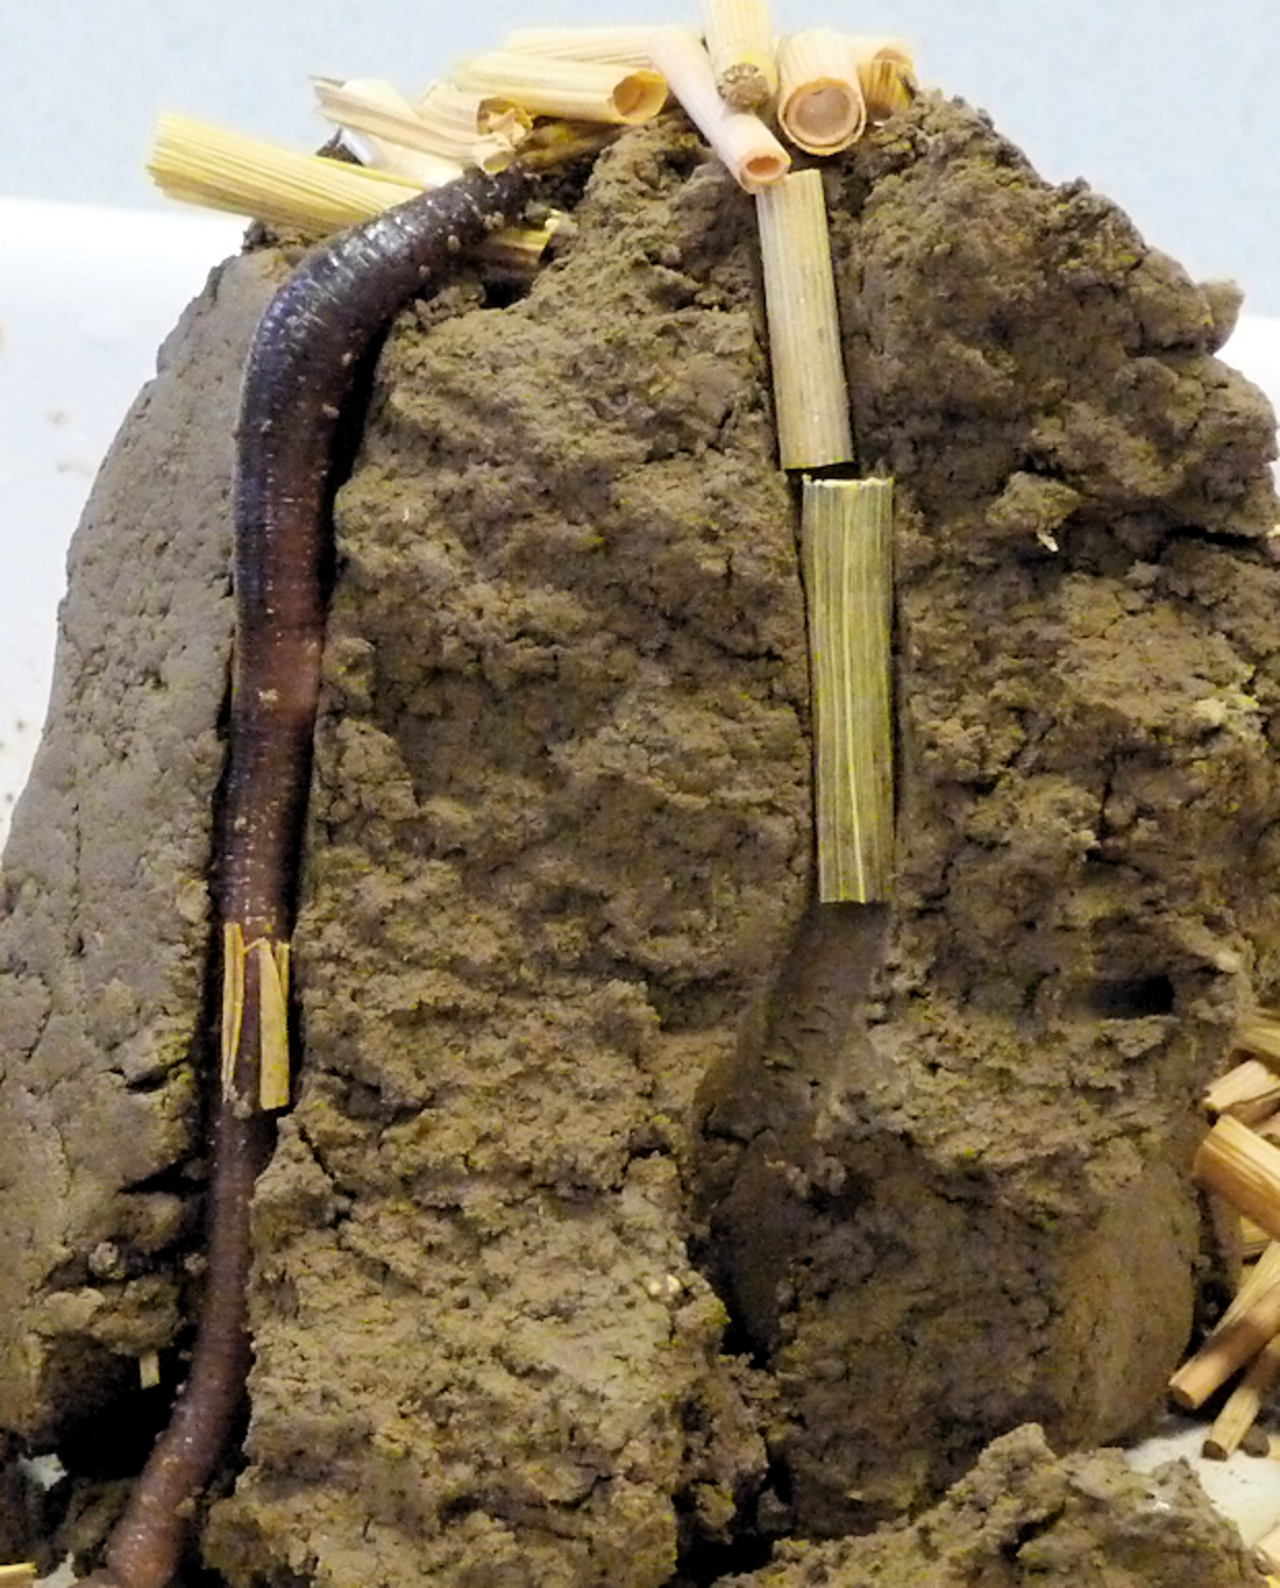 The earthworm species Lumbricus terrestris feeds on organic residues at the soil surface